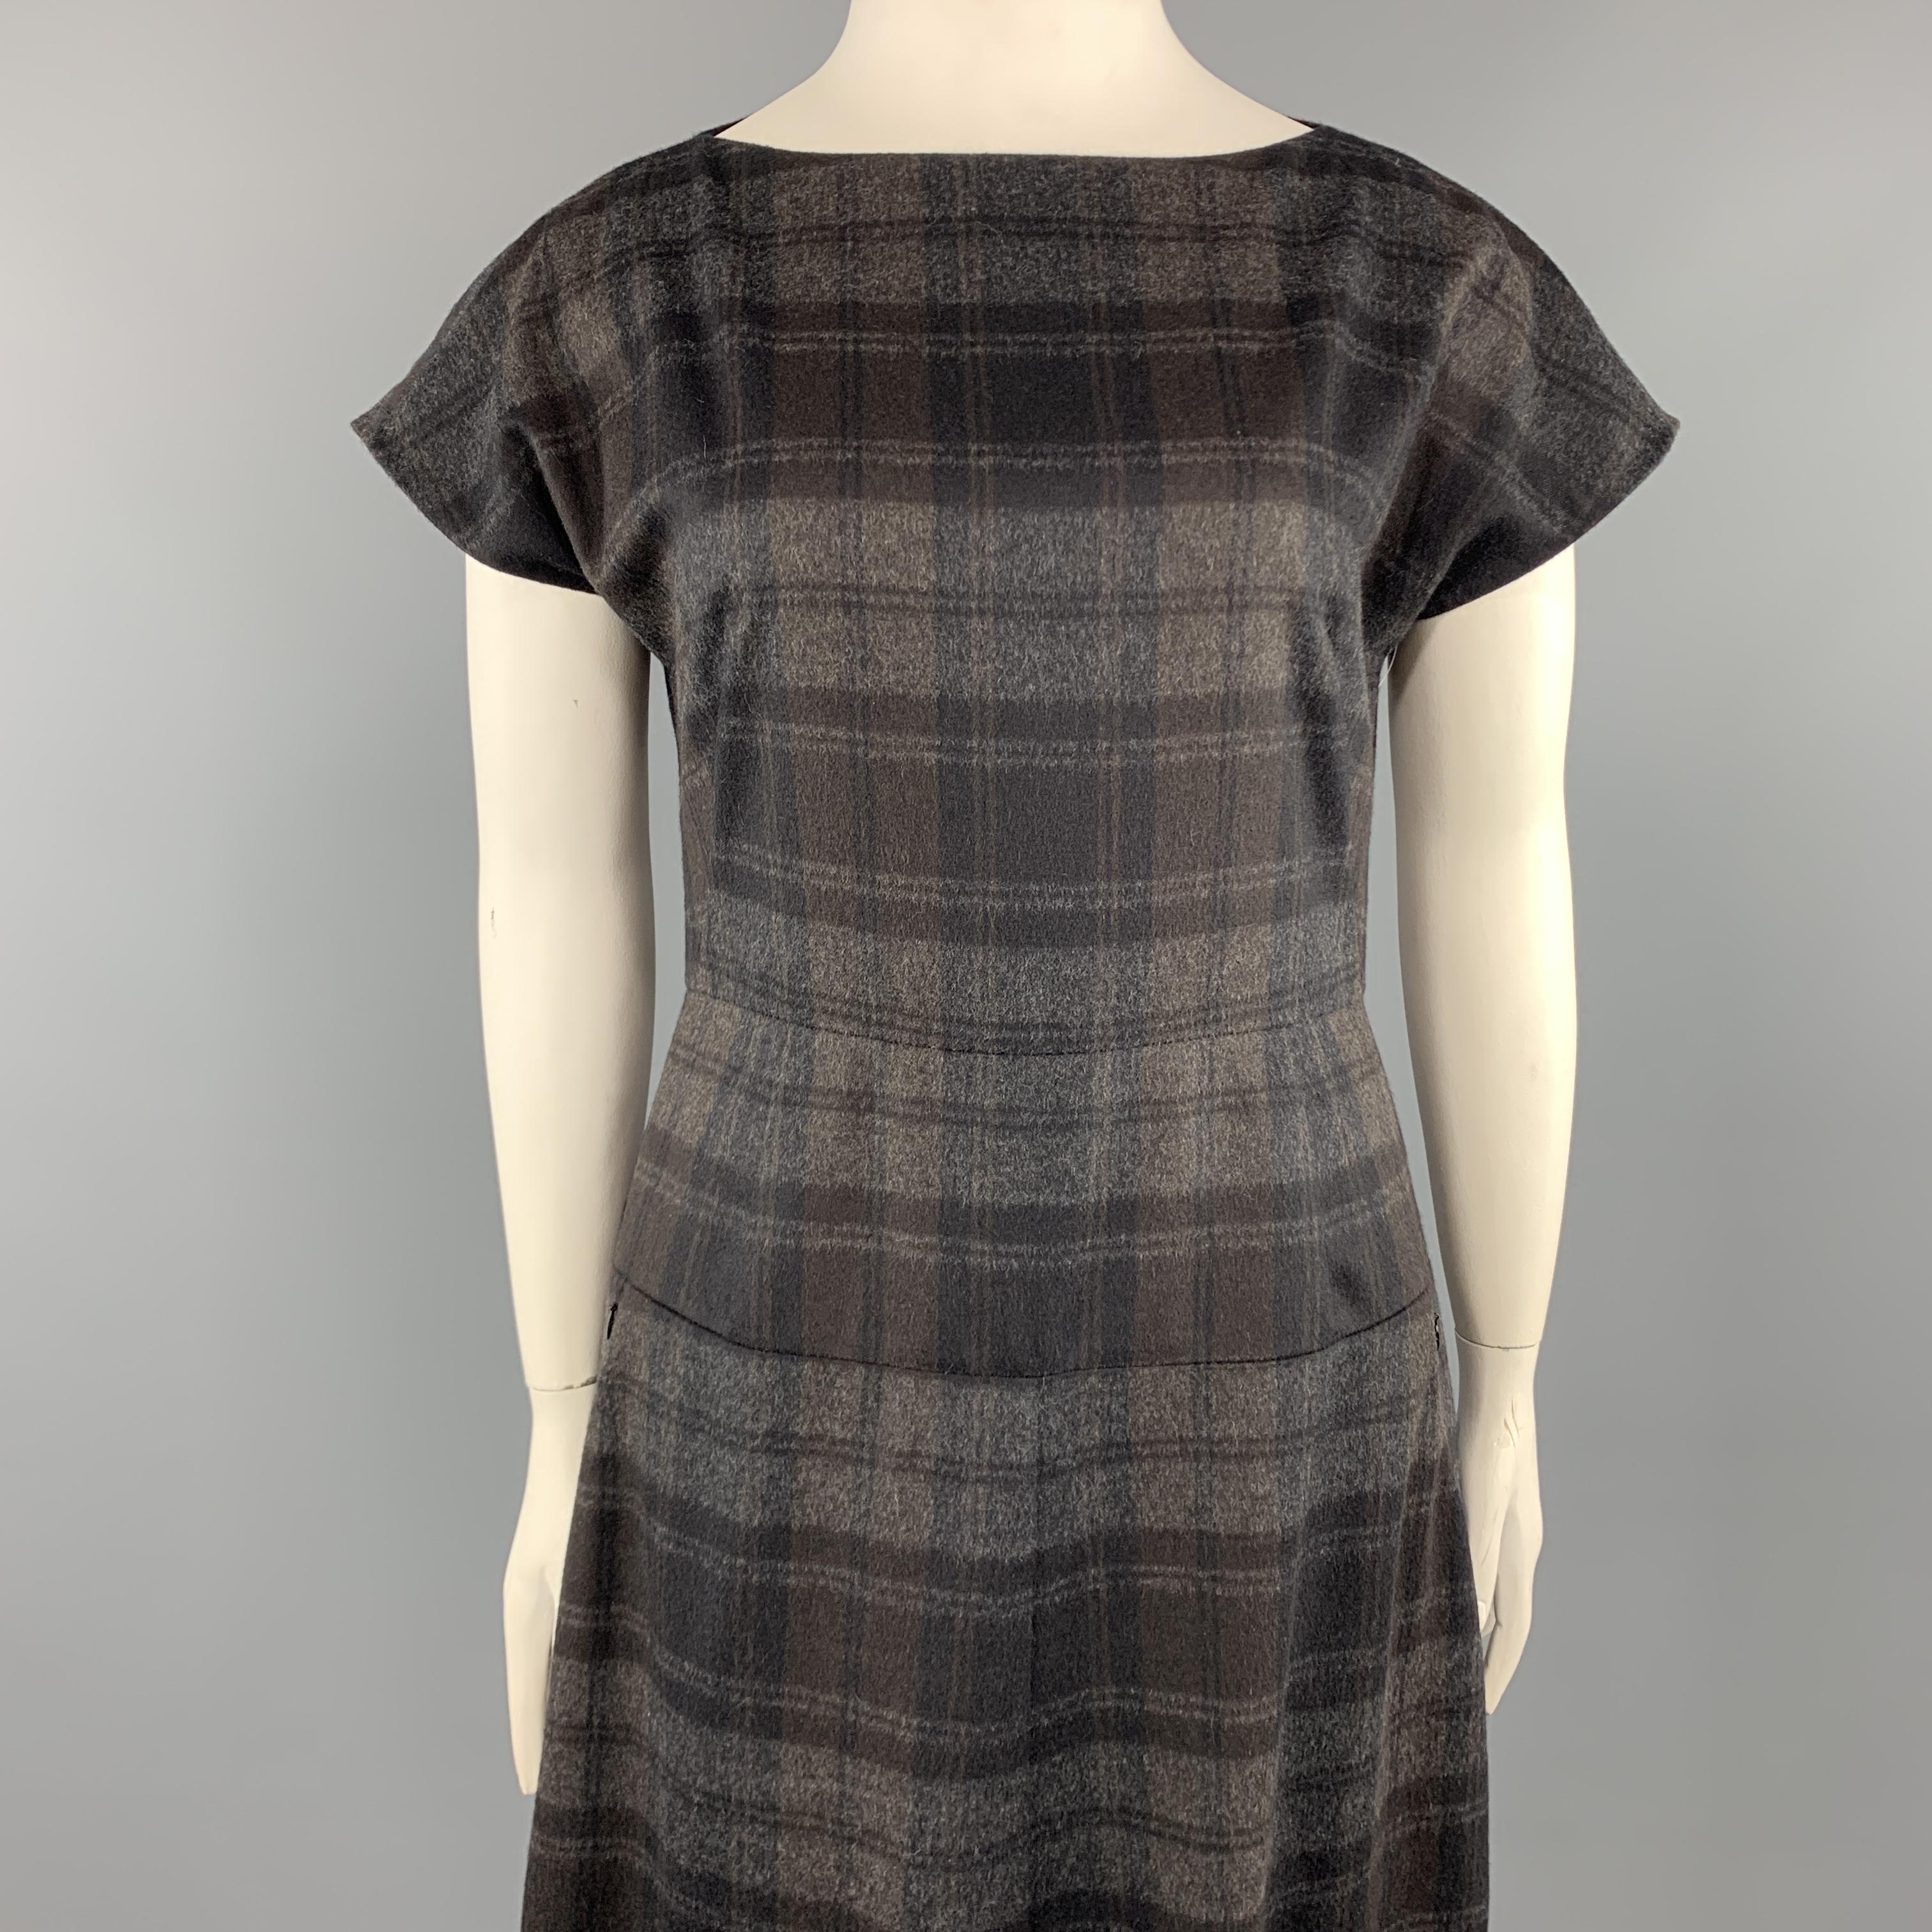 AKRIS shift dress comes in charcoal gray plaid wool angora blend fabric with a boat neck, cap sleeve, fitted waist panel with slanted zip pockets, and slit skirt. 

Excellent Pre-Owned Condition.
Marked: 10

Measurements:

l	Shoulder: 16 in.
l	Bust: